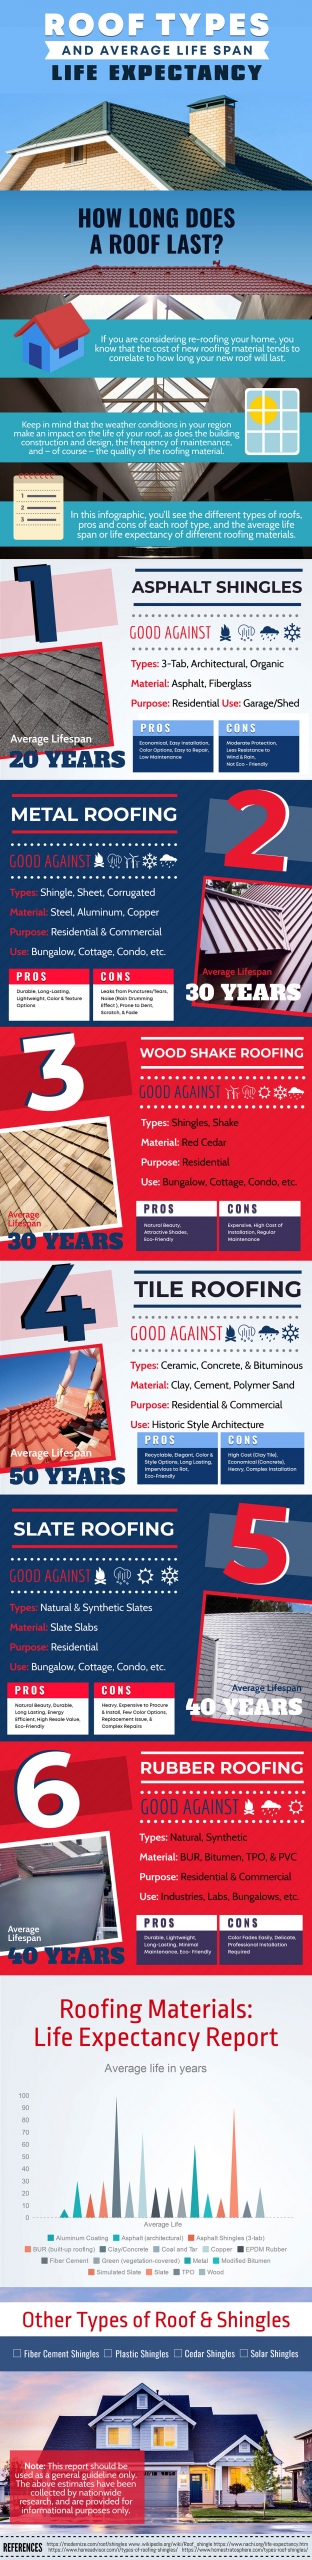 Roof Types and Their Lifespan